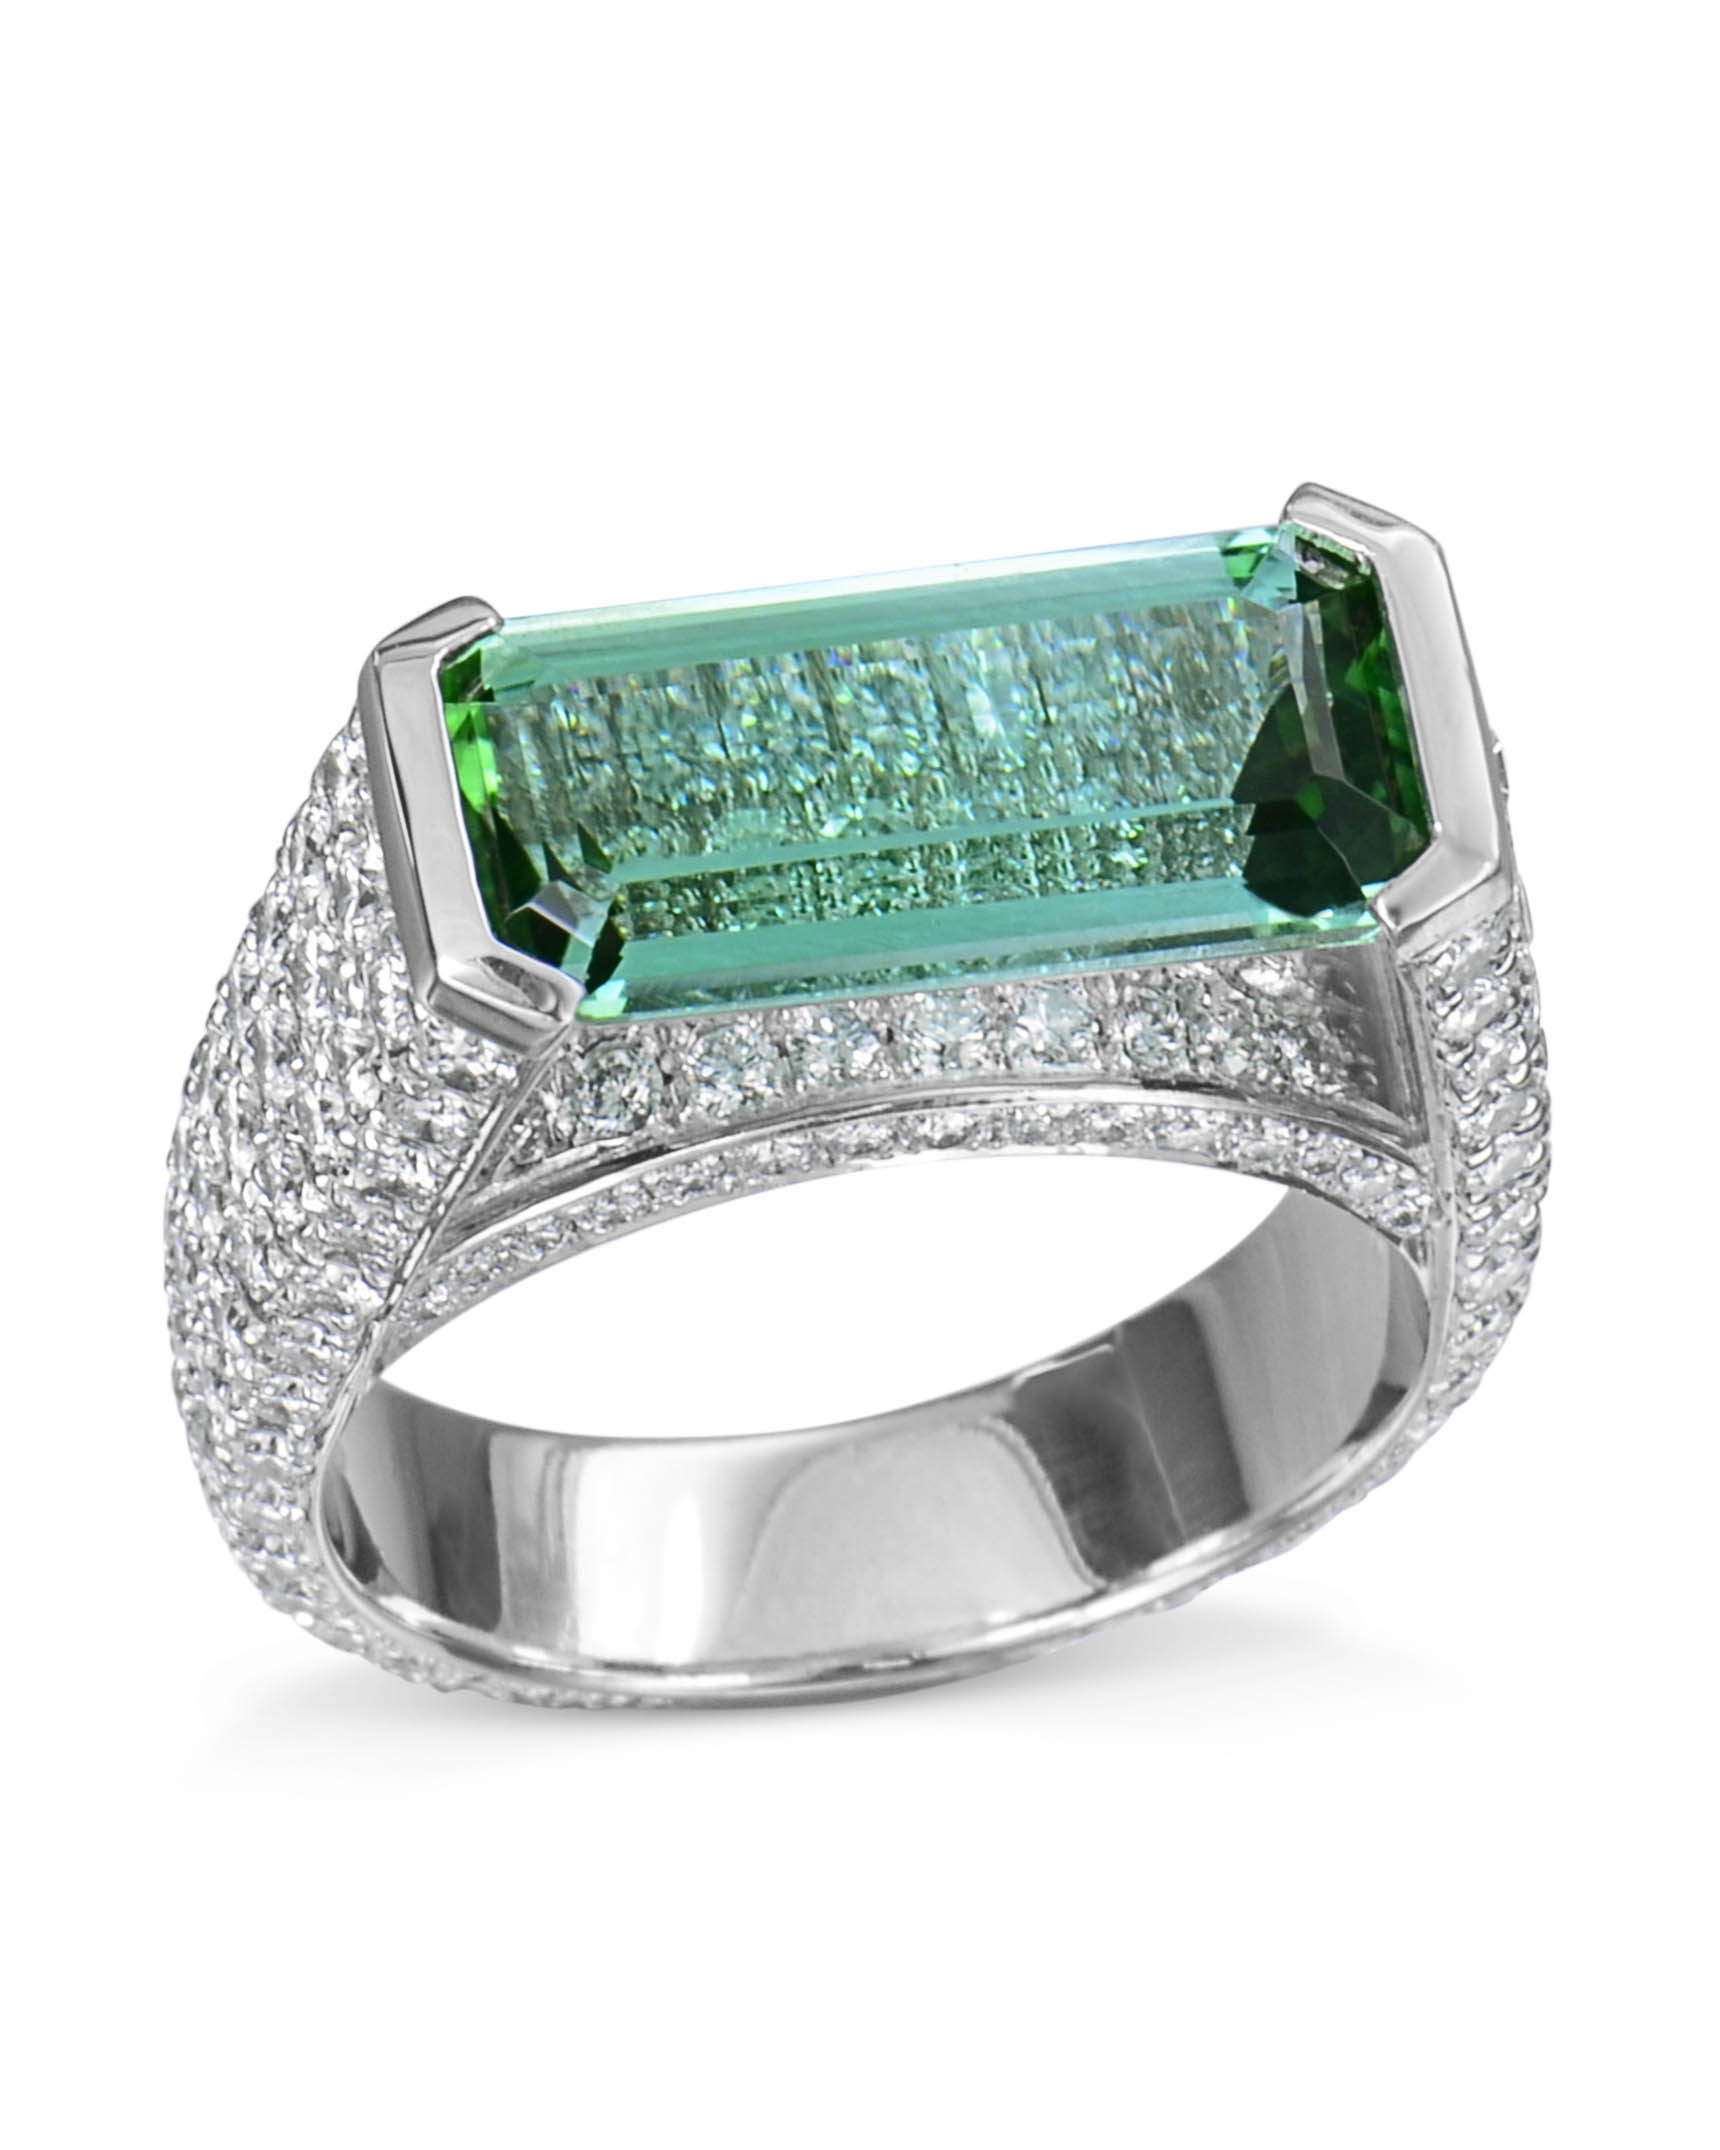 5.80ctw Oval Green Sapphire and Diamond Platinum Ring - 19G63A